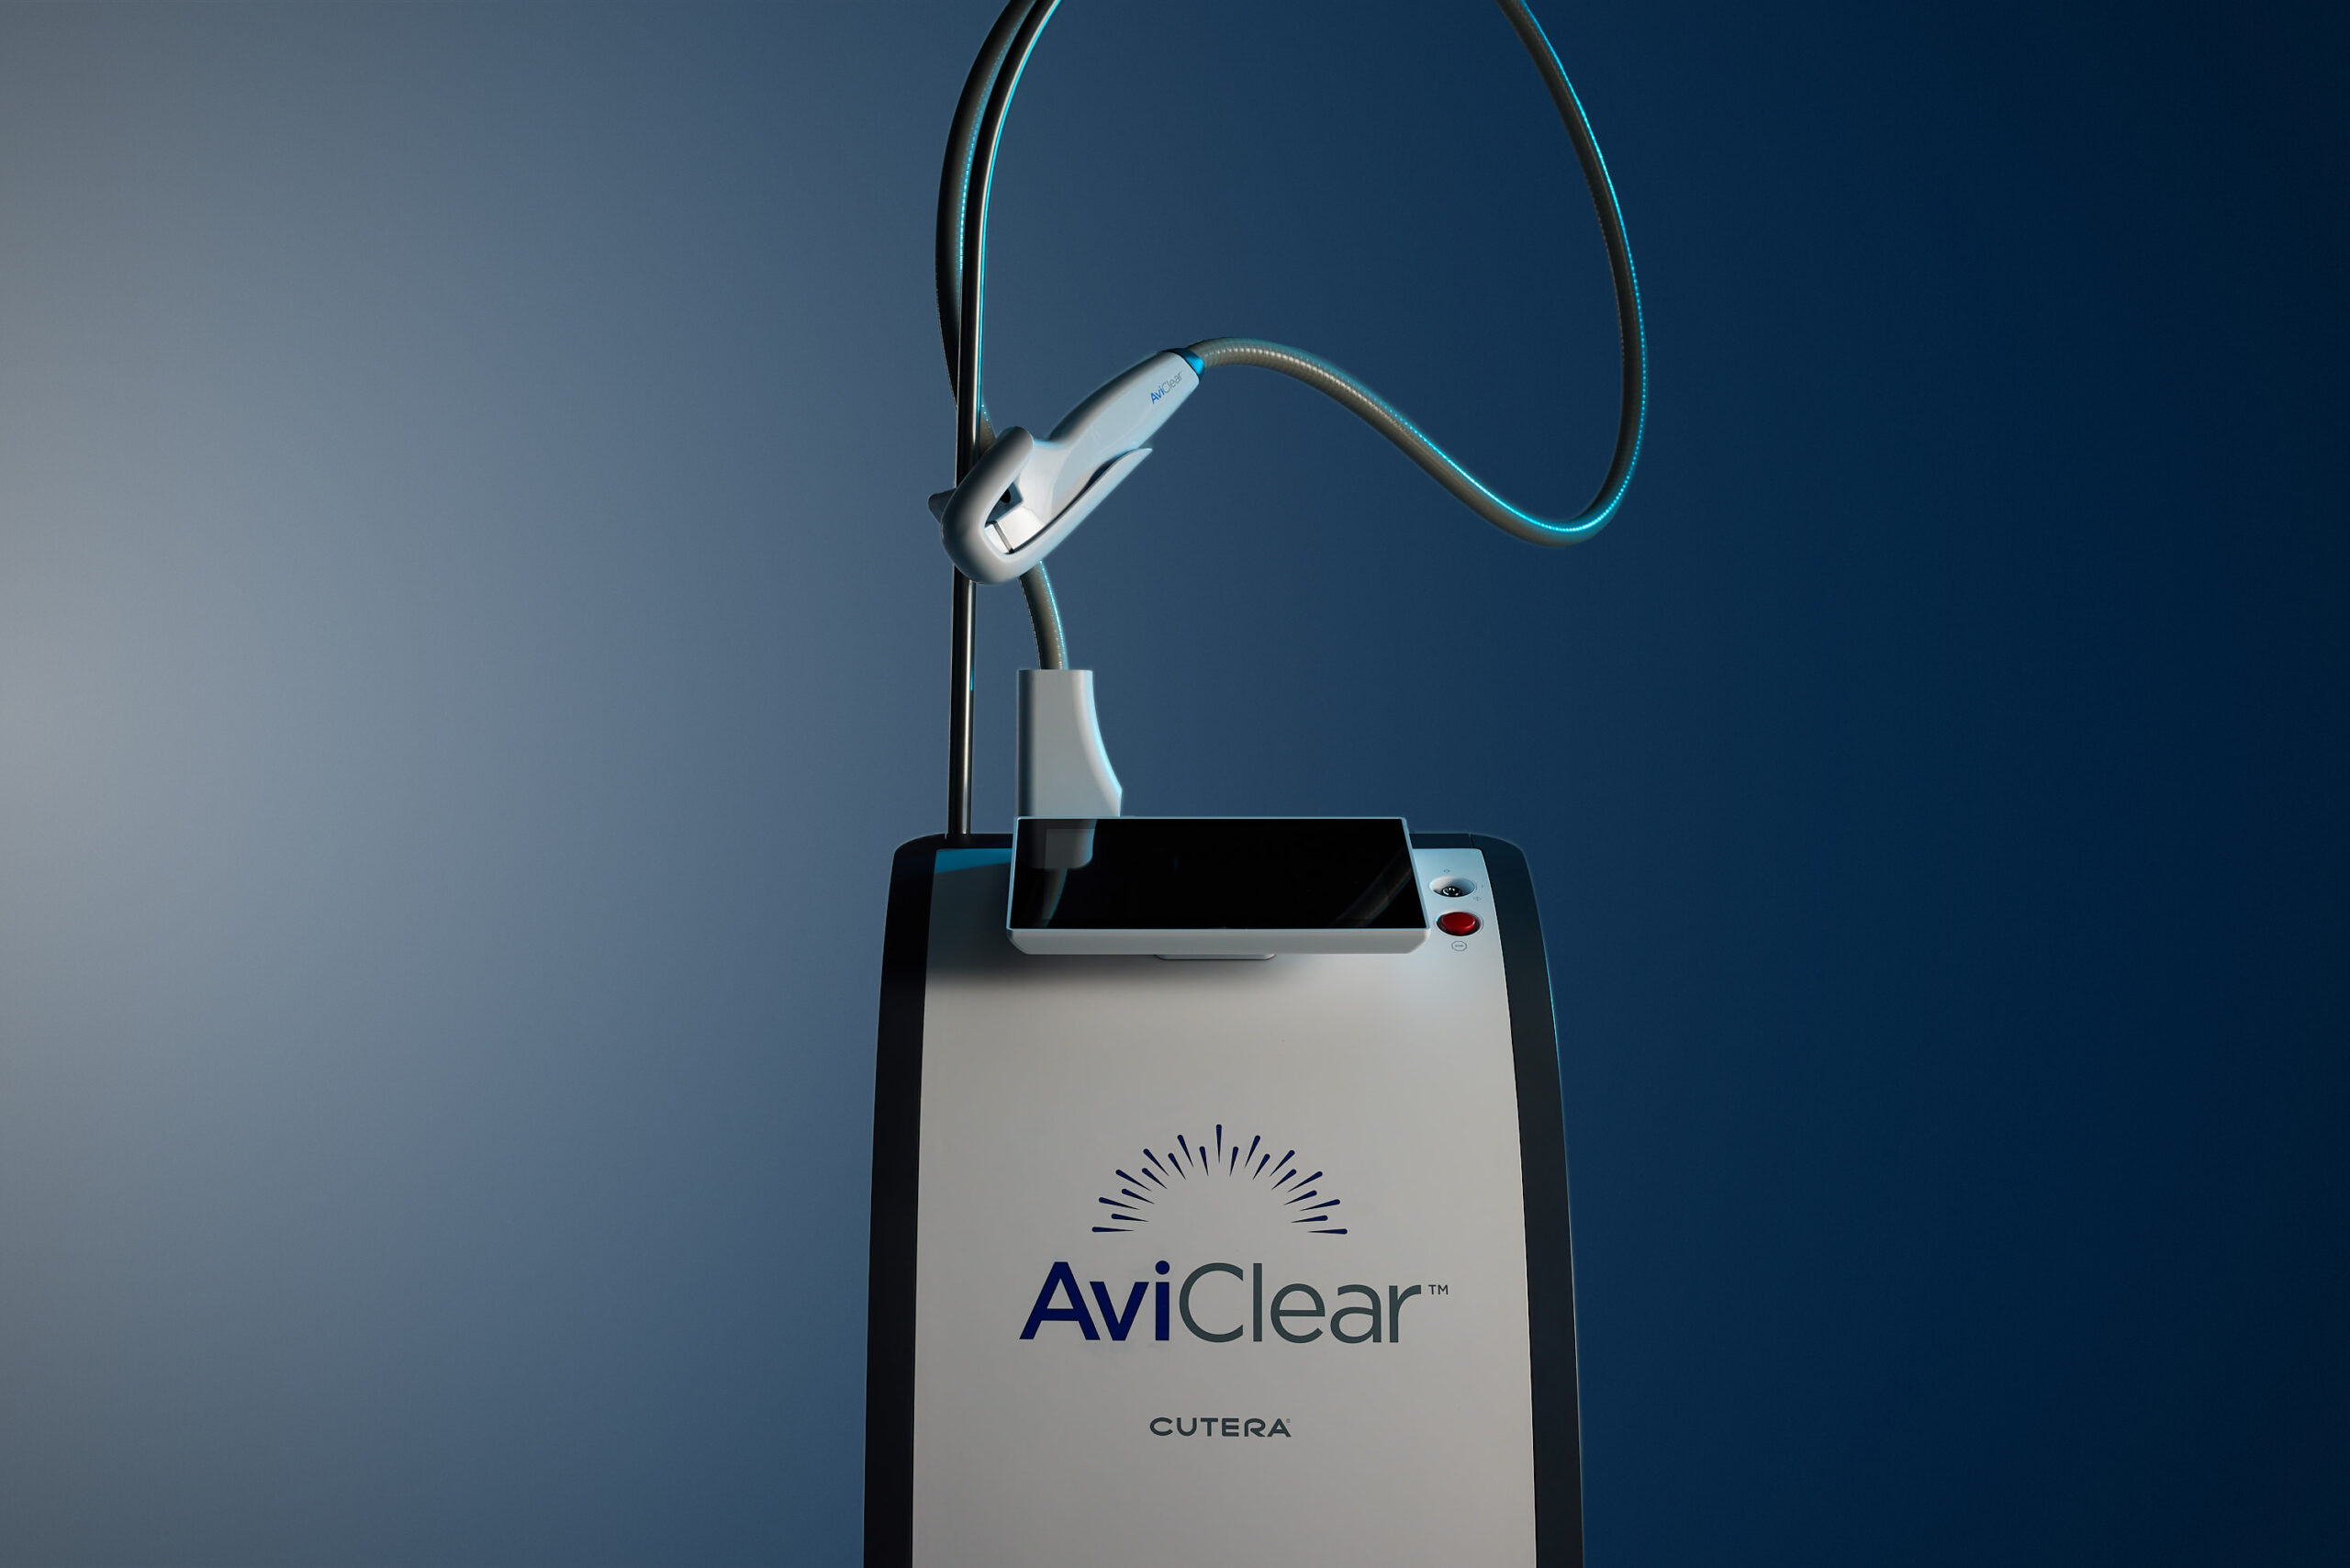 AviClear laser for treatment of acne